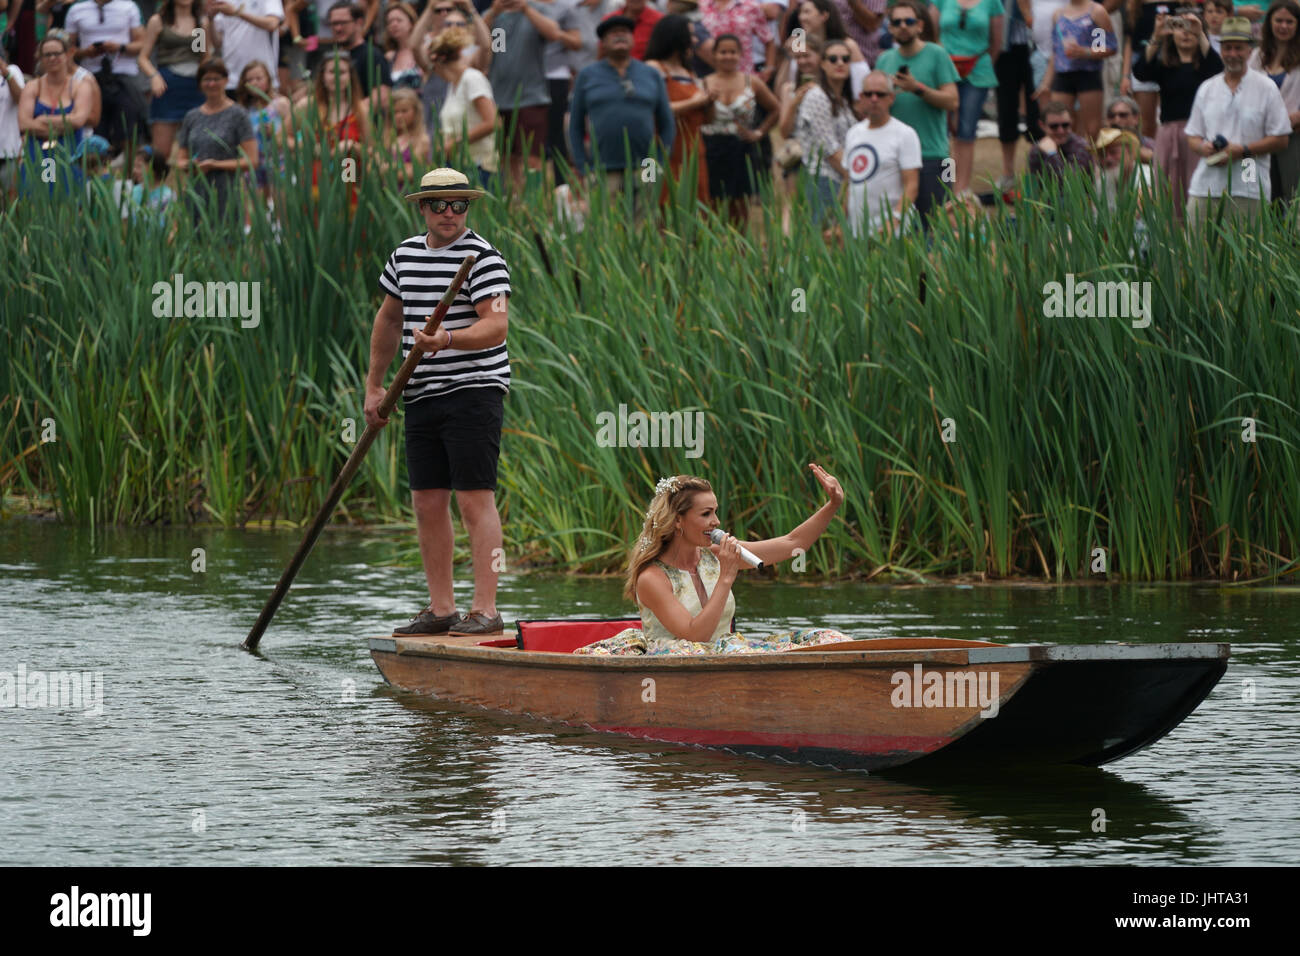 Latitude Festival, UK. 16th July, 2017. Katherine Jenkins singing in a punt before performing on the stage by the lake on day 4 (Sunday) of the 2017 Latitude festival in Henham Park, Southwold in Suffolk. Photo date: Sunday, July 16, 2017. Photo credit should read: Roger Garfield/Alamy Live News. Stock Photo